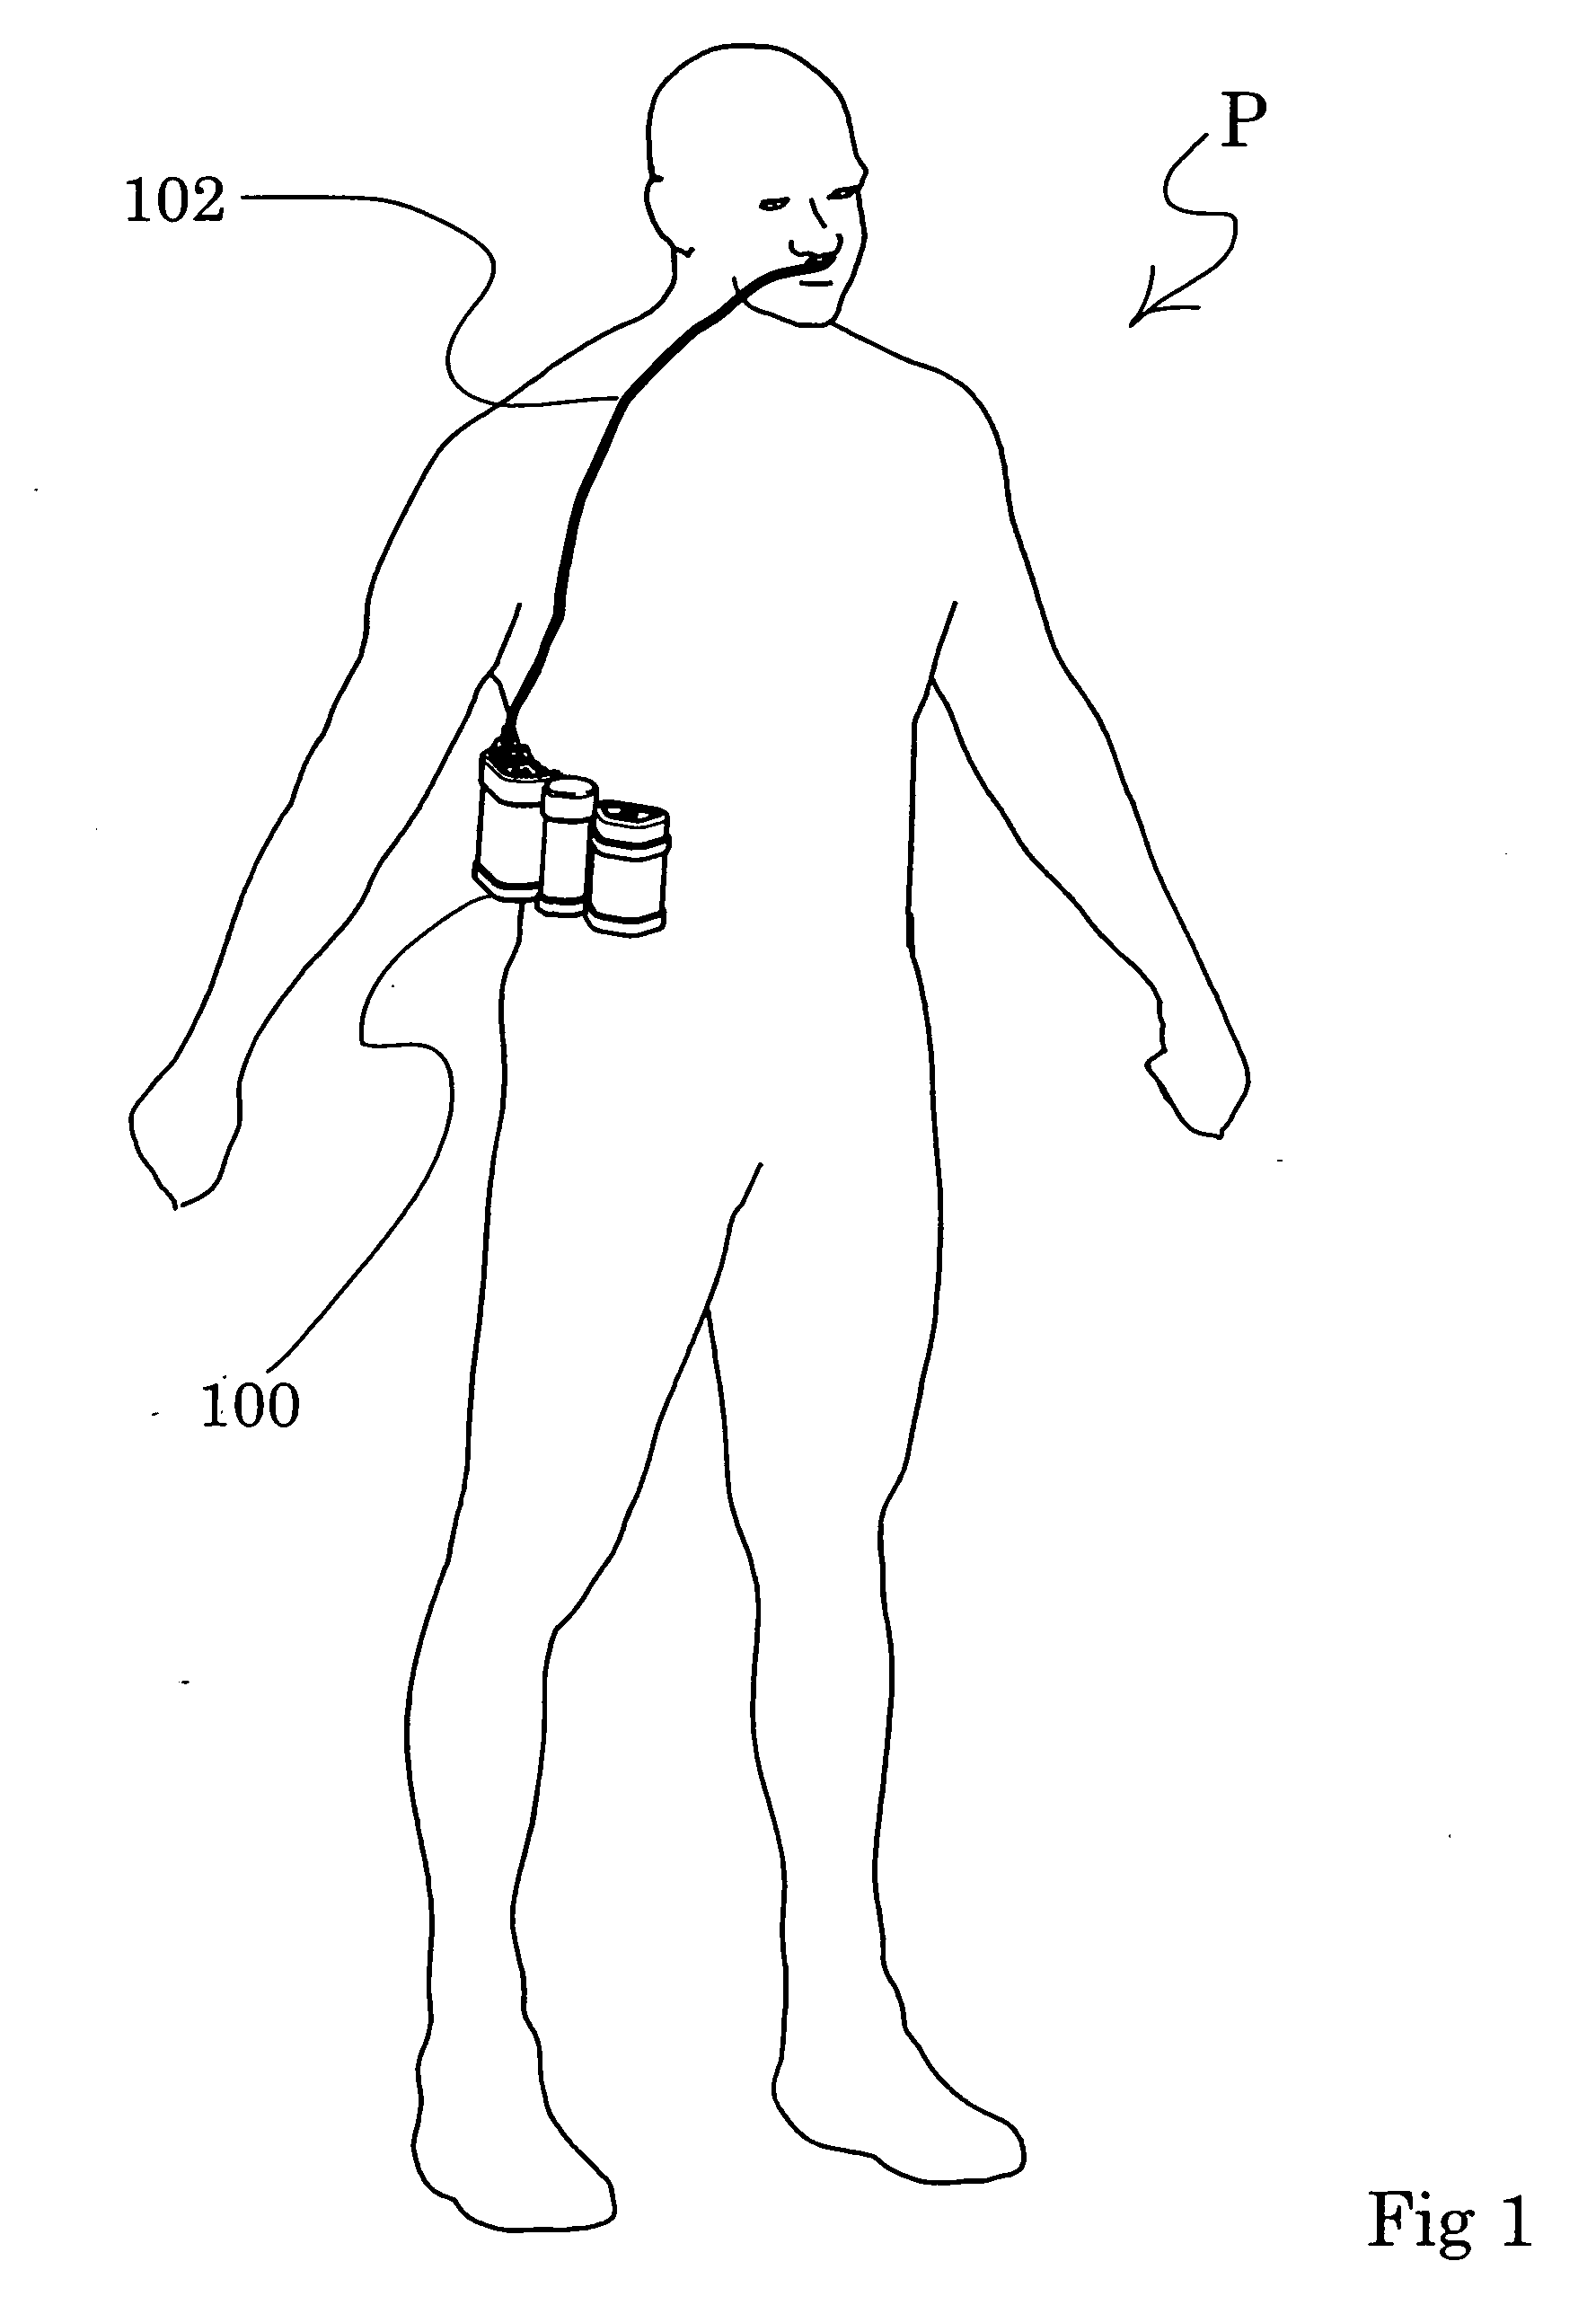 Ambulatory oxygen concentrator containing a power pack